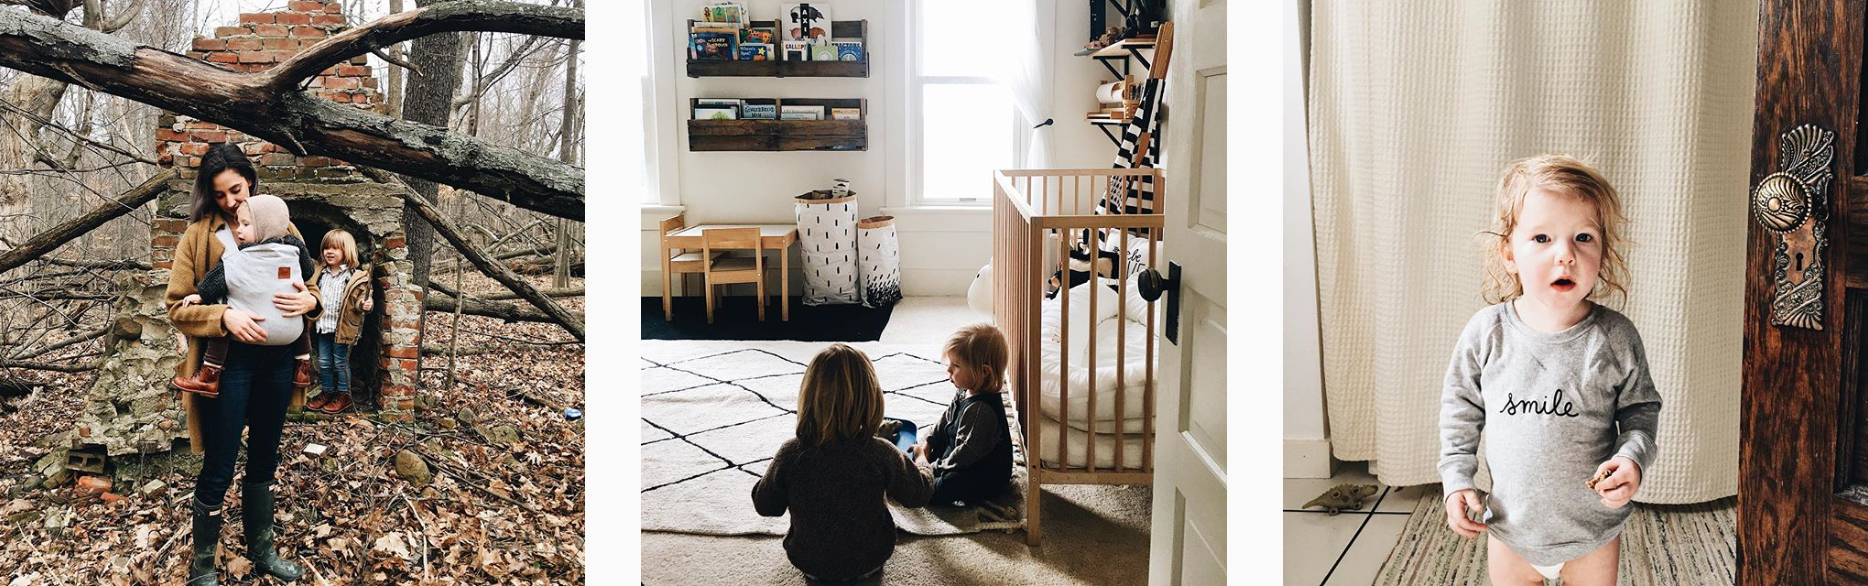 5 Cool Moms to Follow on Instagram - PLANOLY Blog - Mother's Day - Lindsey Badenhop